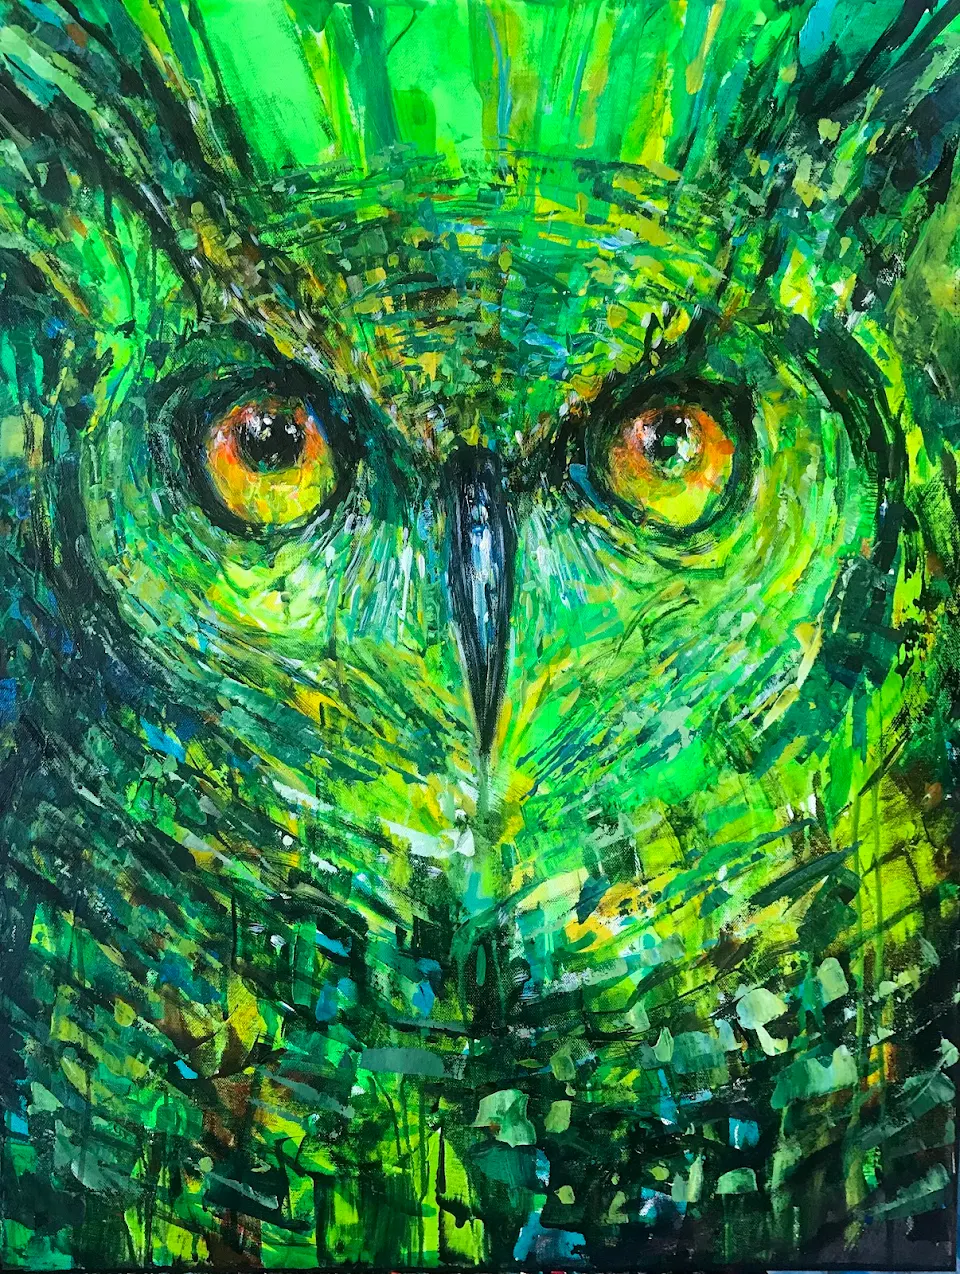 Owl I painted recently.